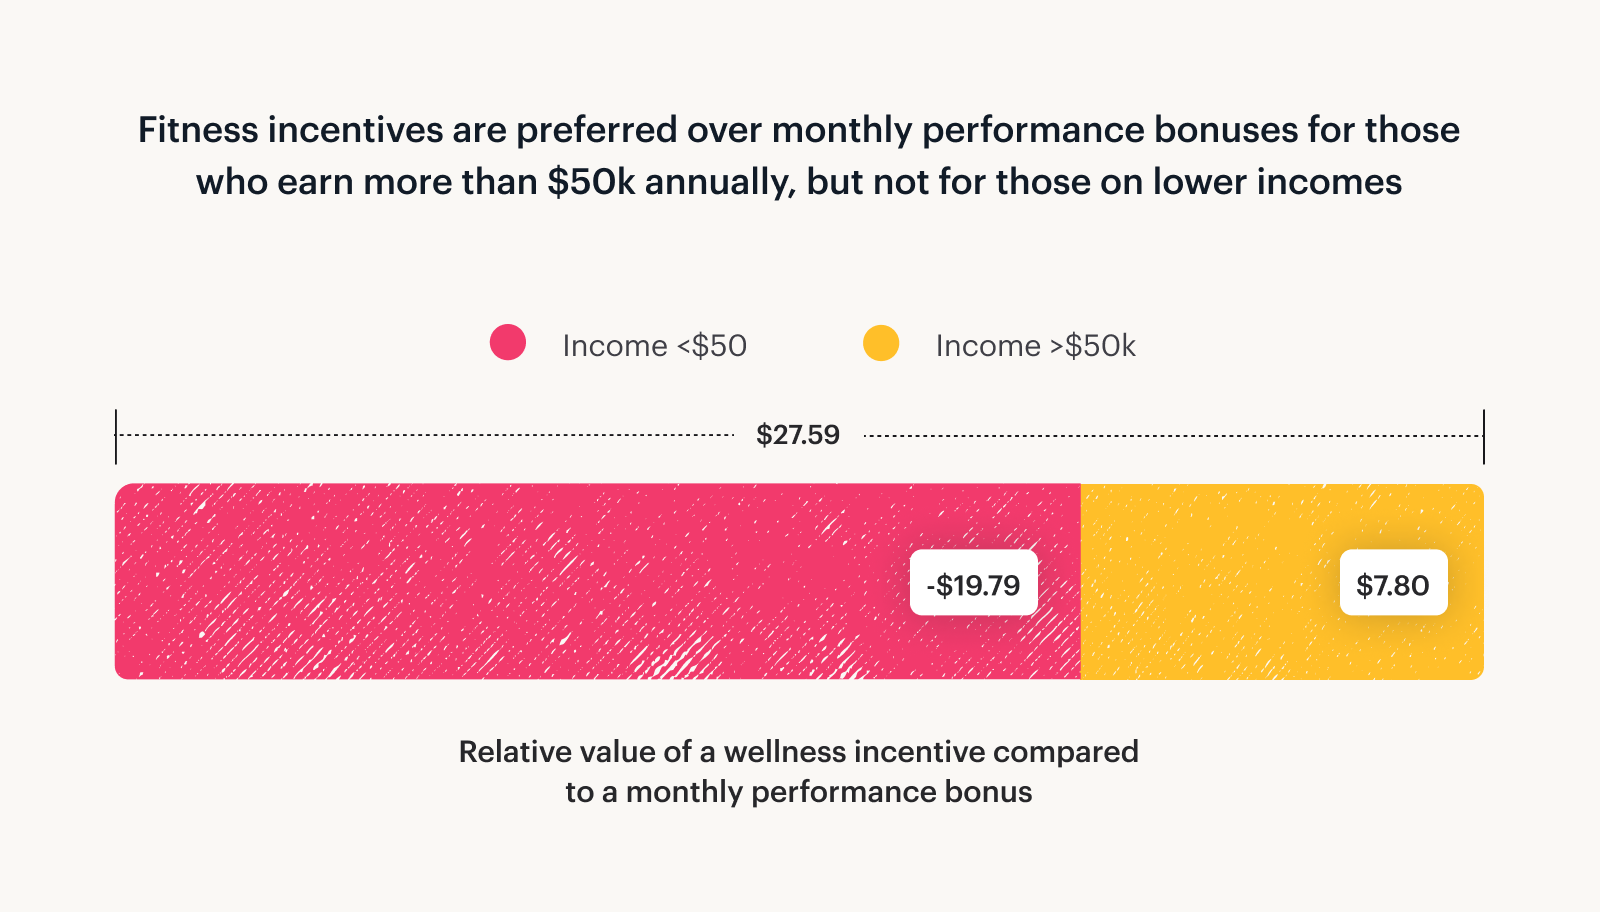 A graph showing that incentives for wellness programs are preferred overly monthly bonuses for those earning more than $50K annually.